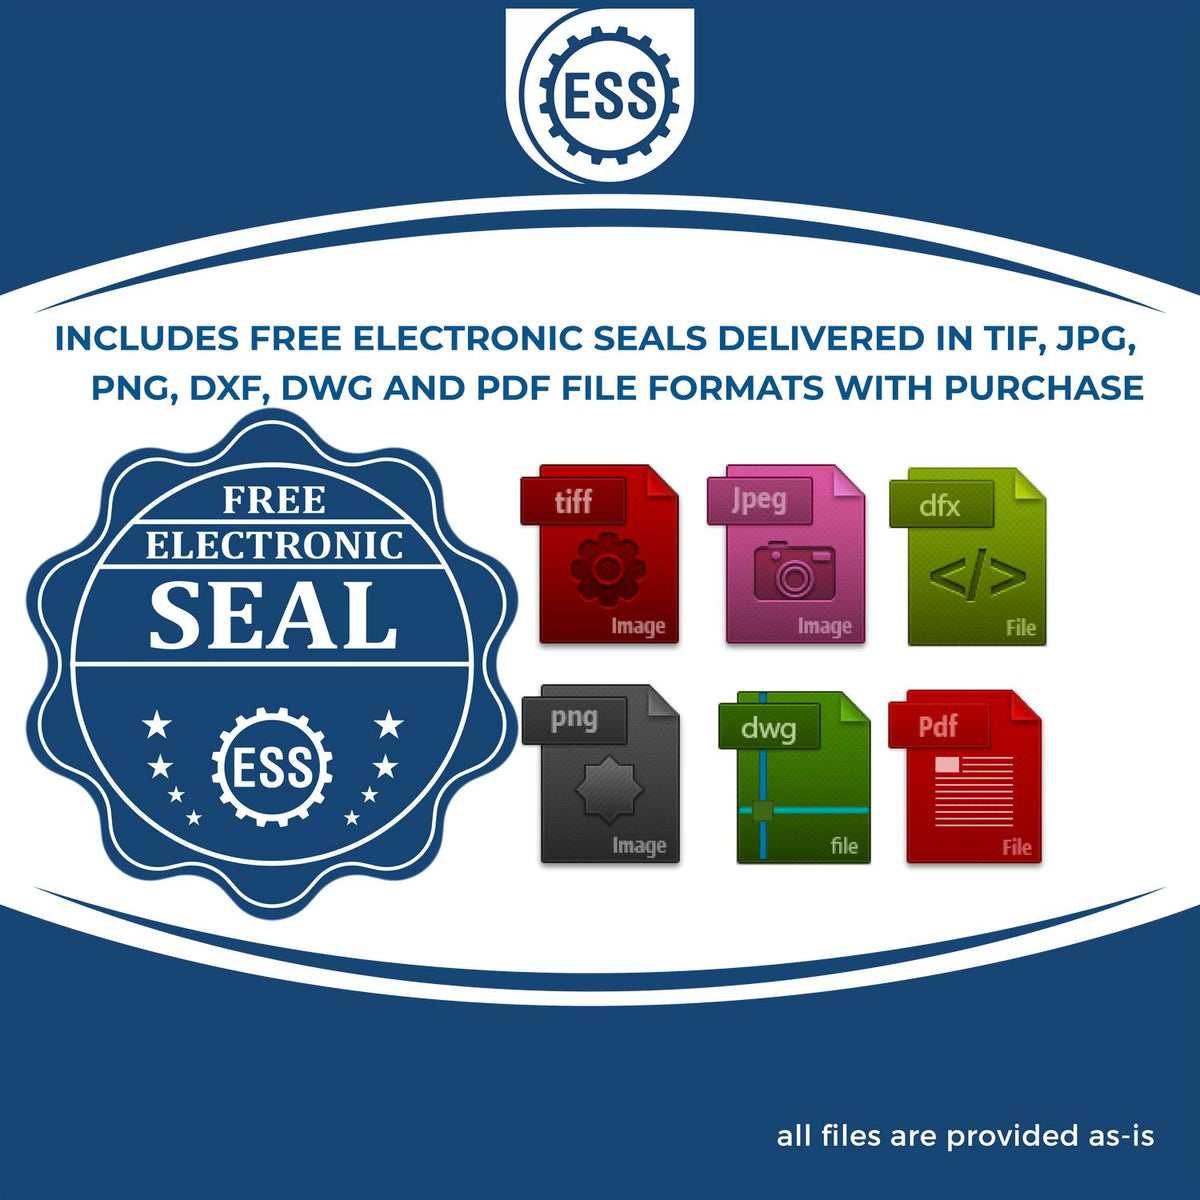 An infographic for the free electronic seal for the Long Reach Minnesota Land Surveyor Seal illustrating the different file type icons such as DXF, DWG, TIF, JPG and PNG.